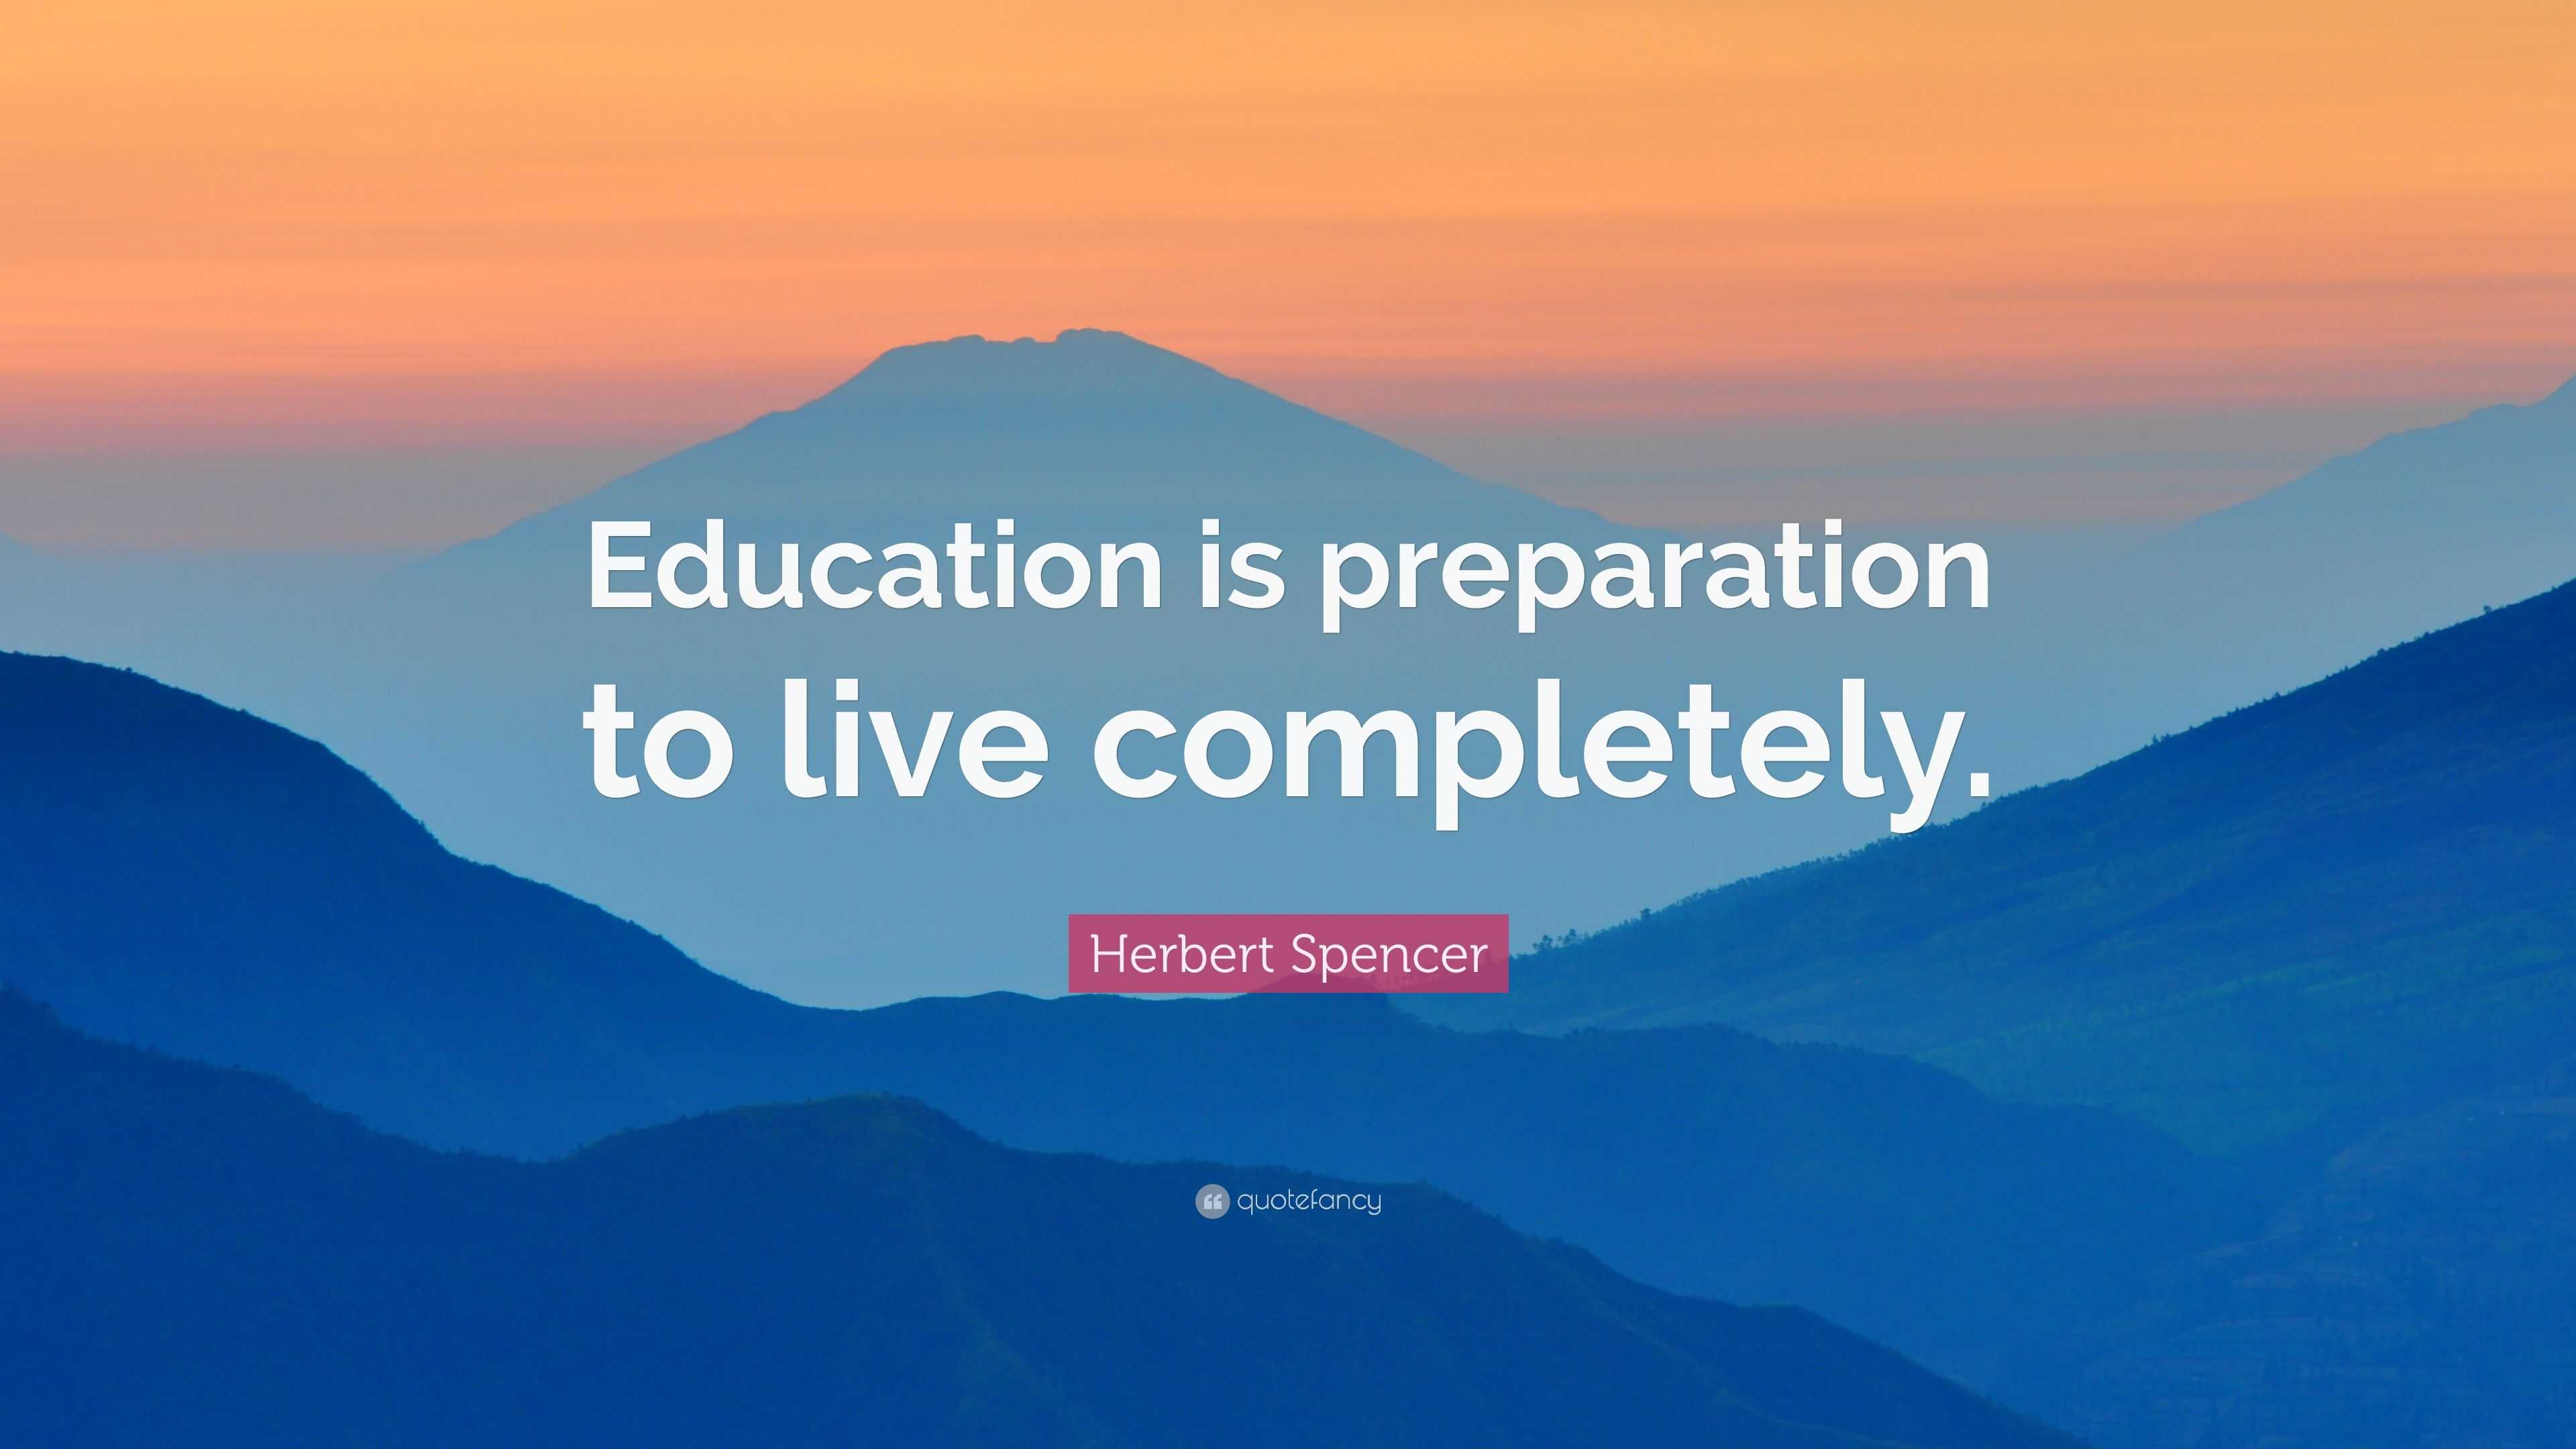 Herbert Spencer Quote: “Education is preparation to live completely.”